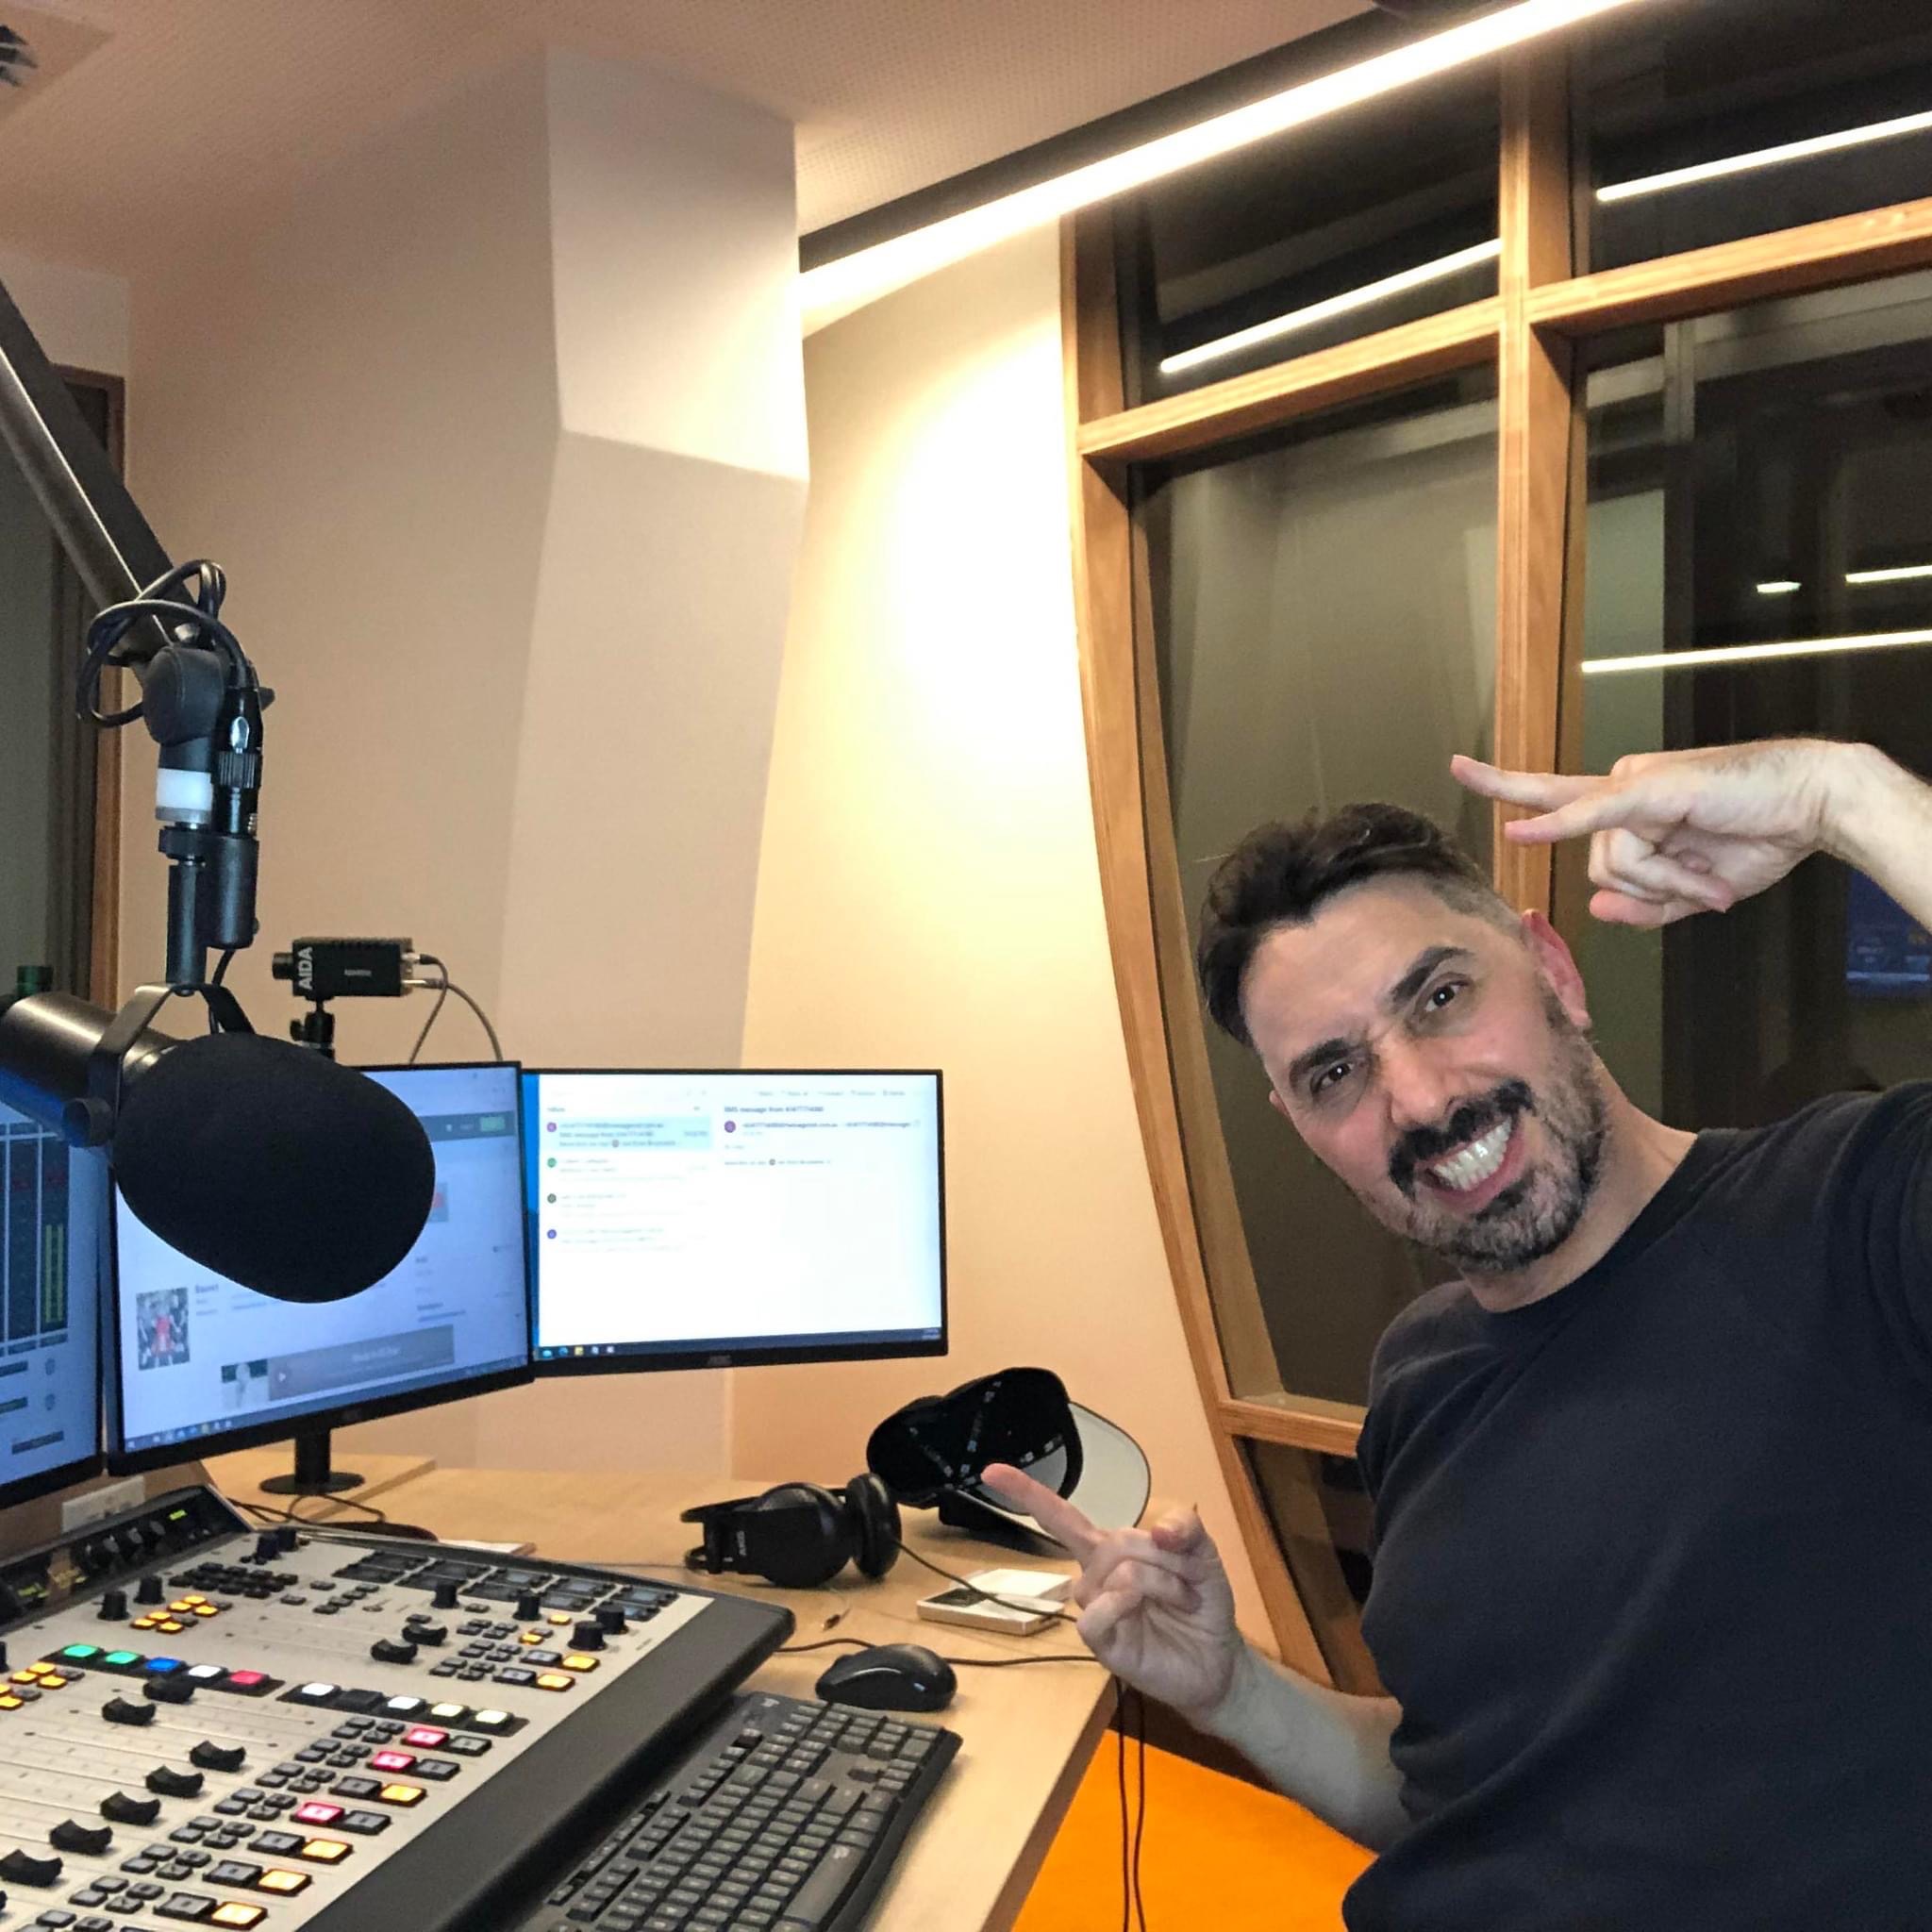 Robbie Molinari – JOY Presenter With A Passion For Music & Radio Since He Was 12